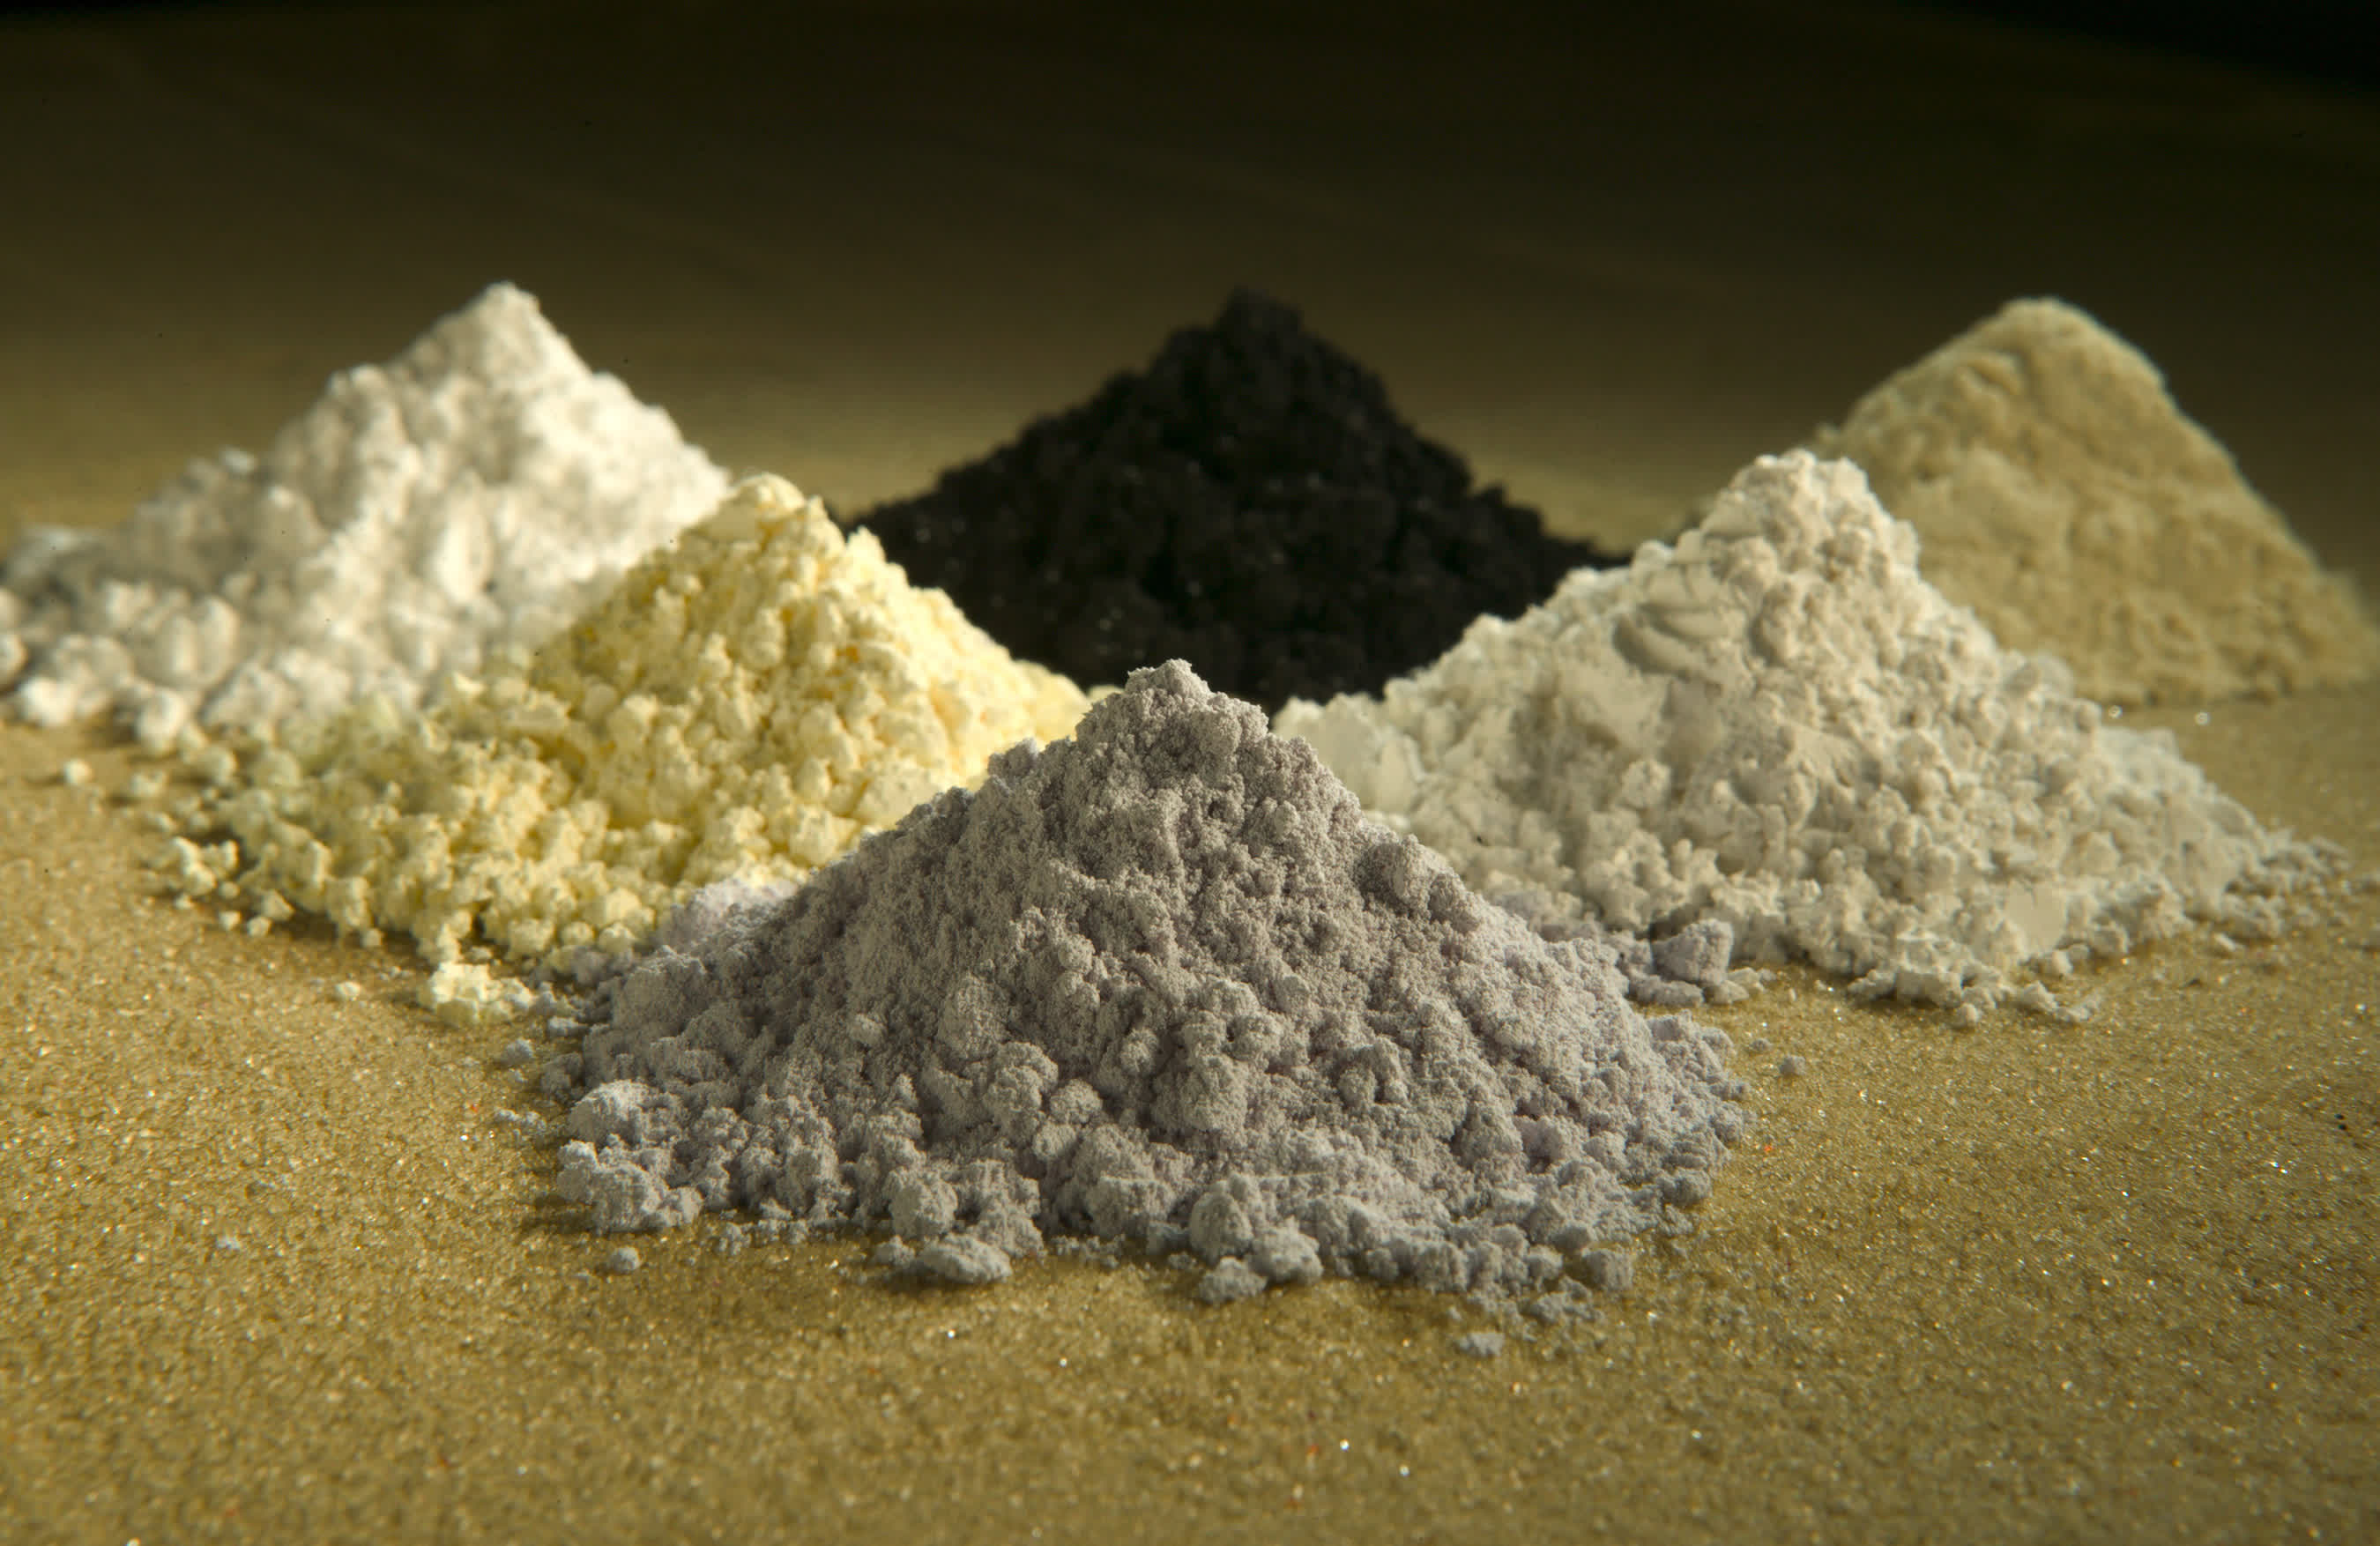 Rare earth metal prices explode, may lead to increased prices for electronics